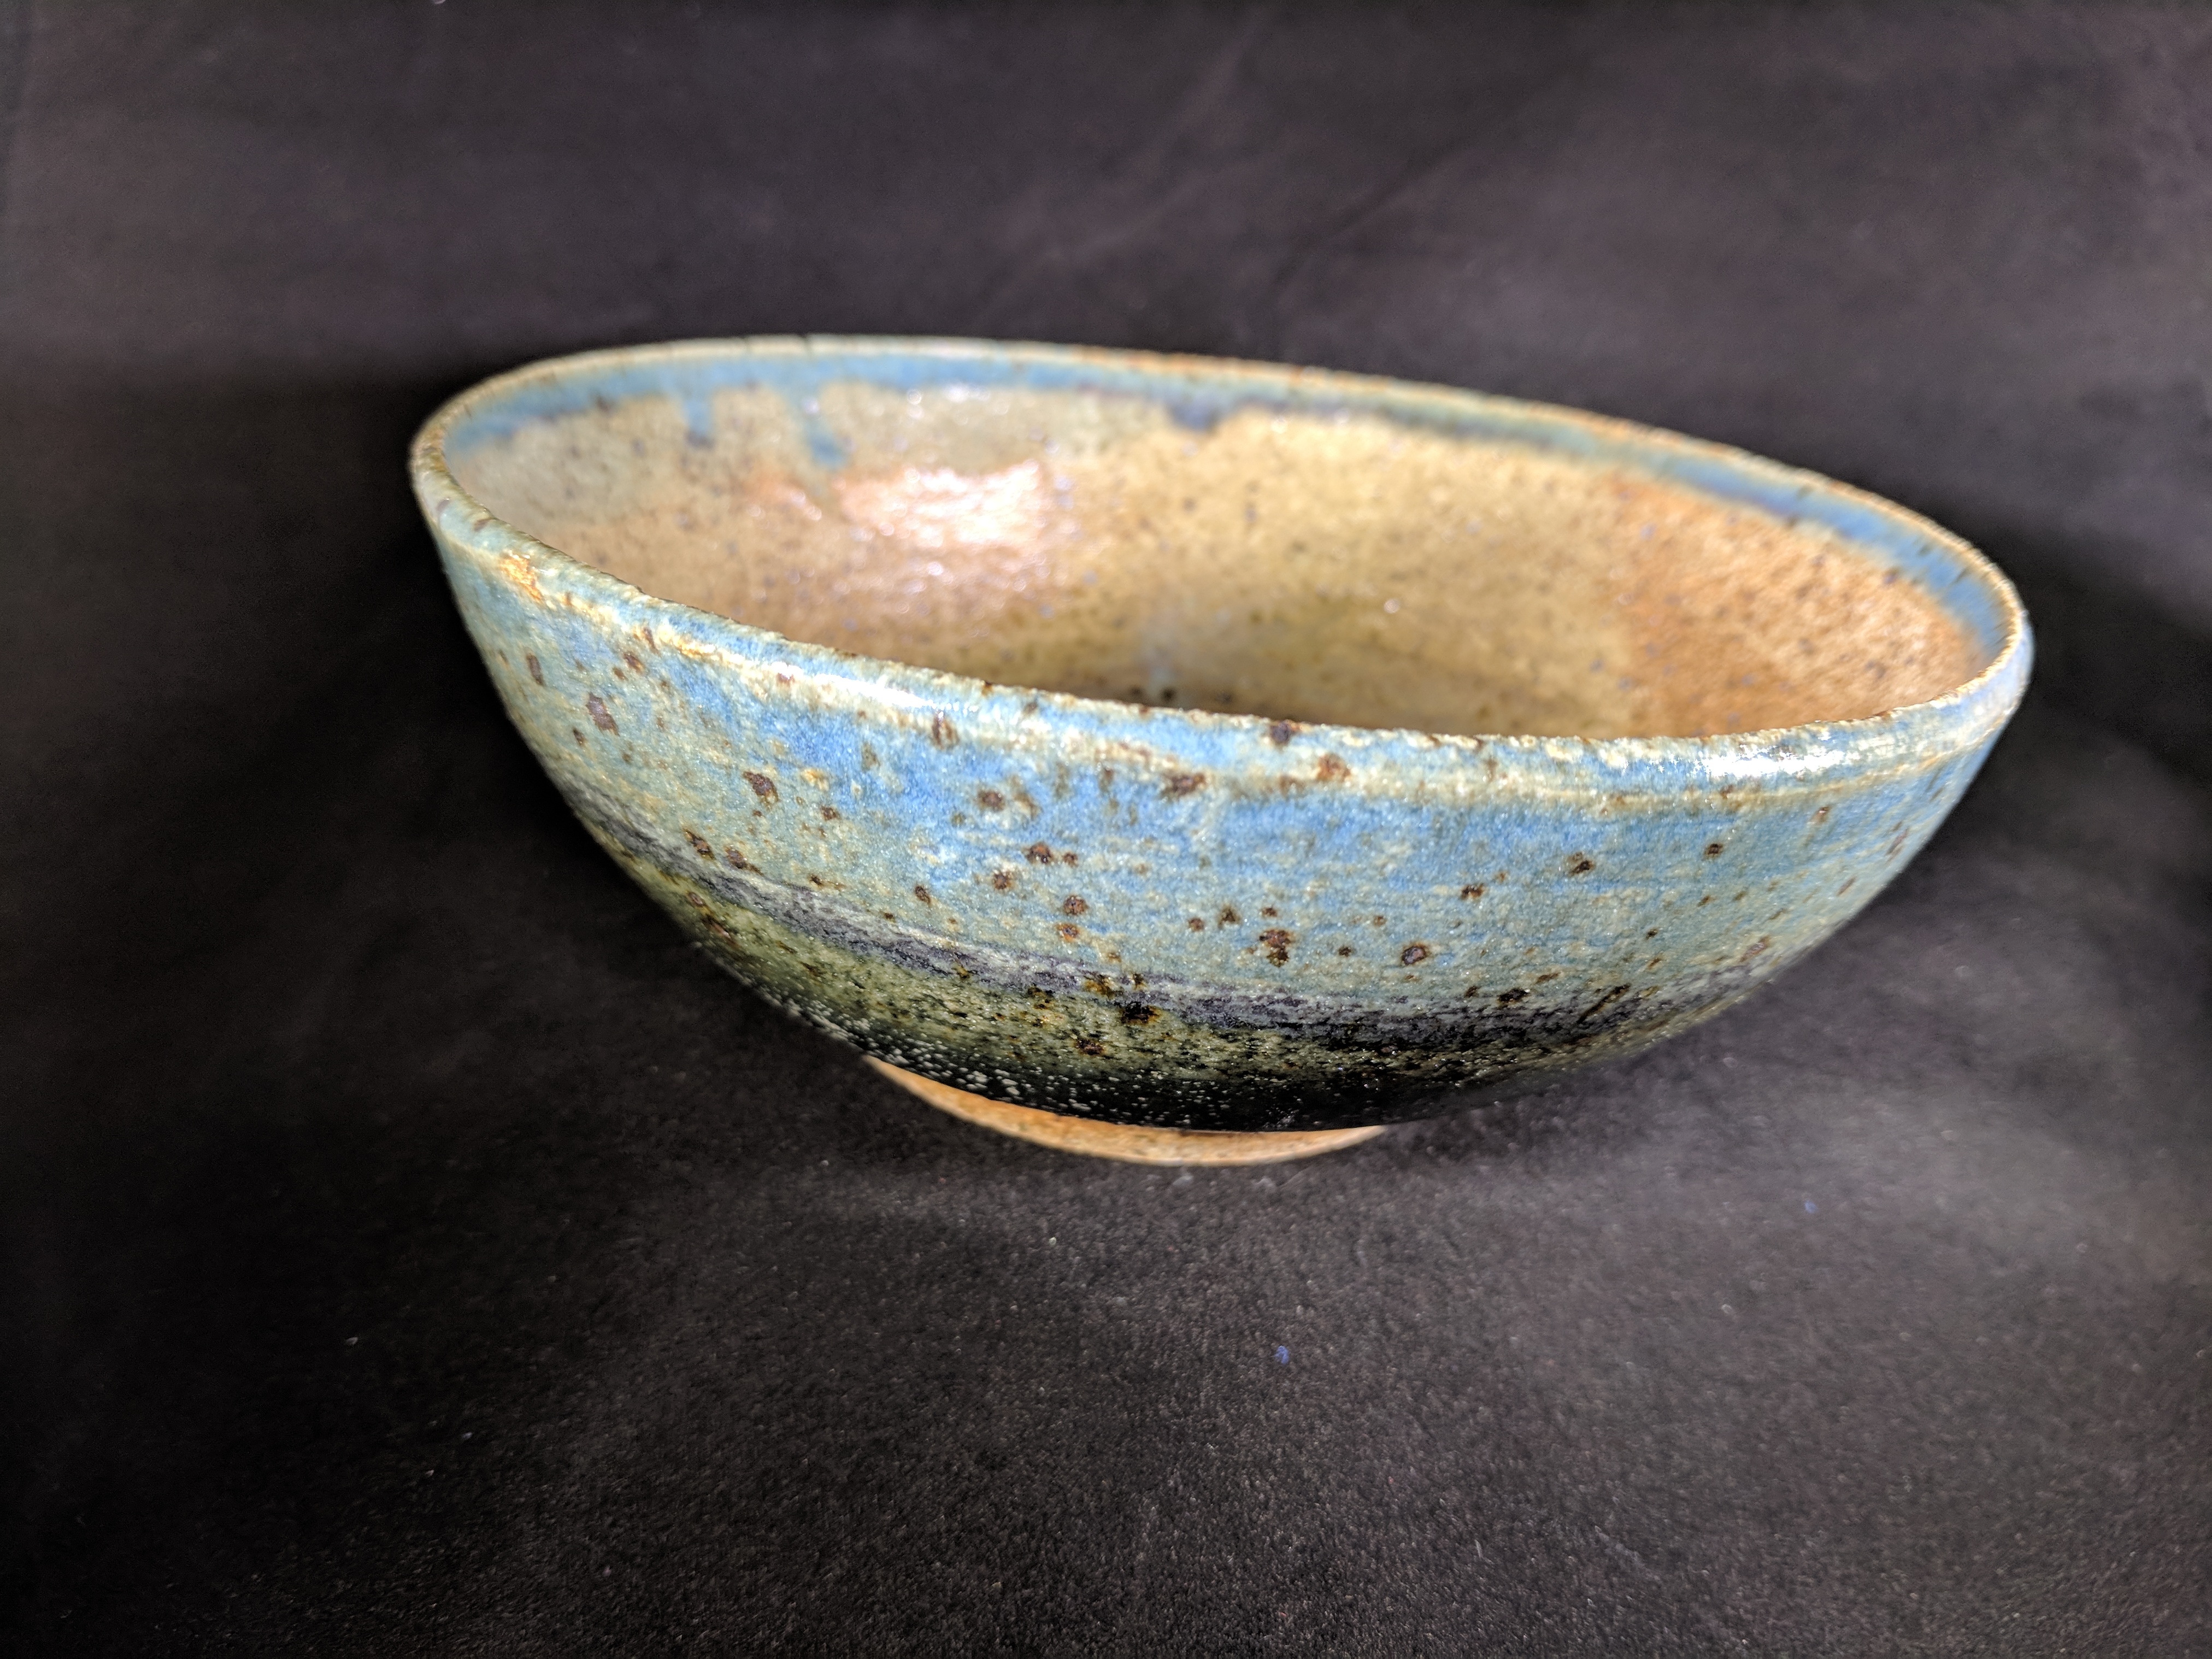 Multicolored bowl from purple to light blue, brown interior